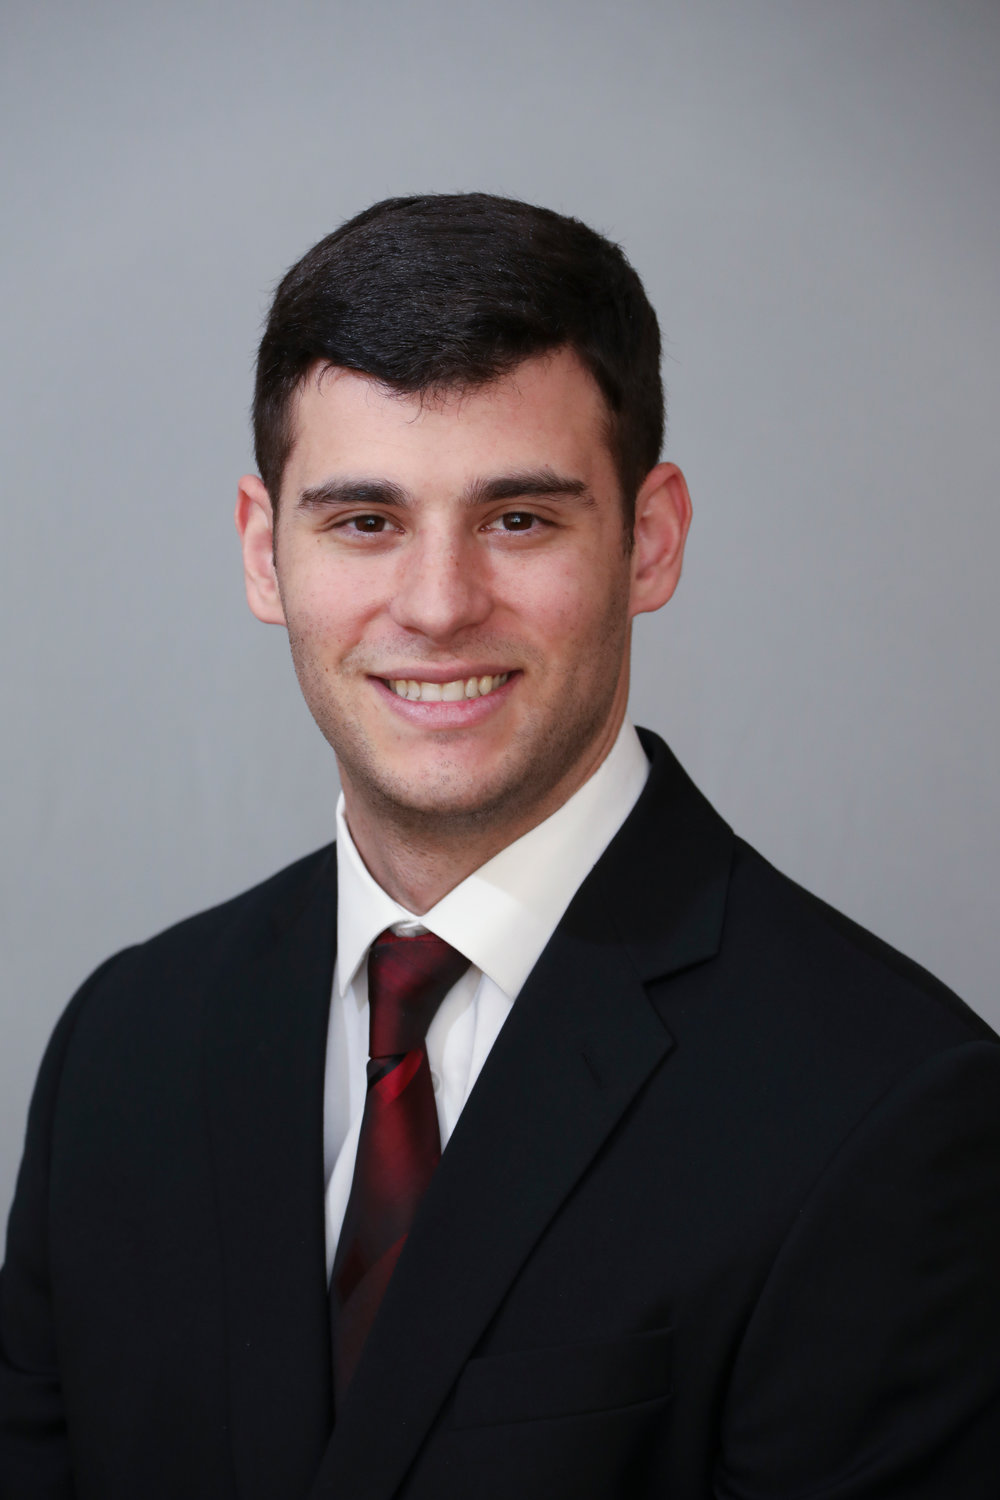 Sahn Ward Coschignano, PLLC, has added Joseph Brees, from Woodmere, as an associate at the Uniondale law firm.